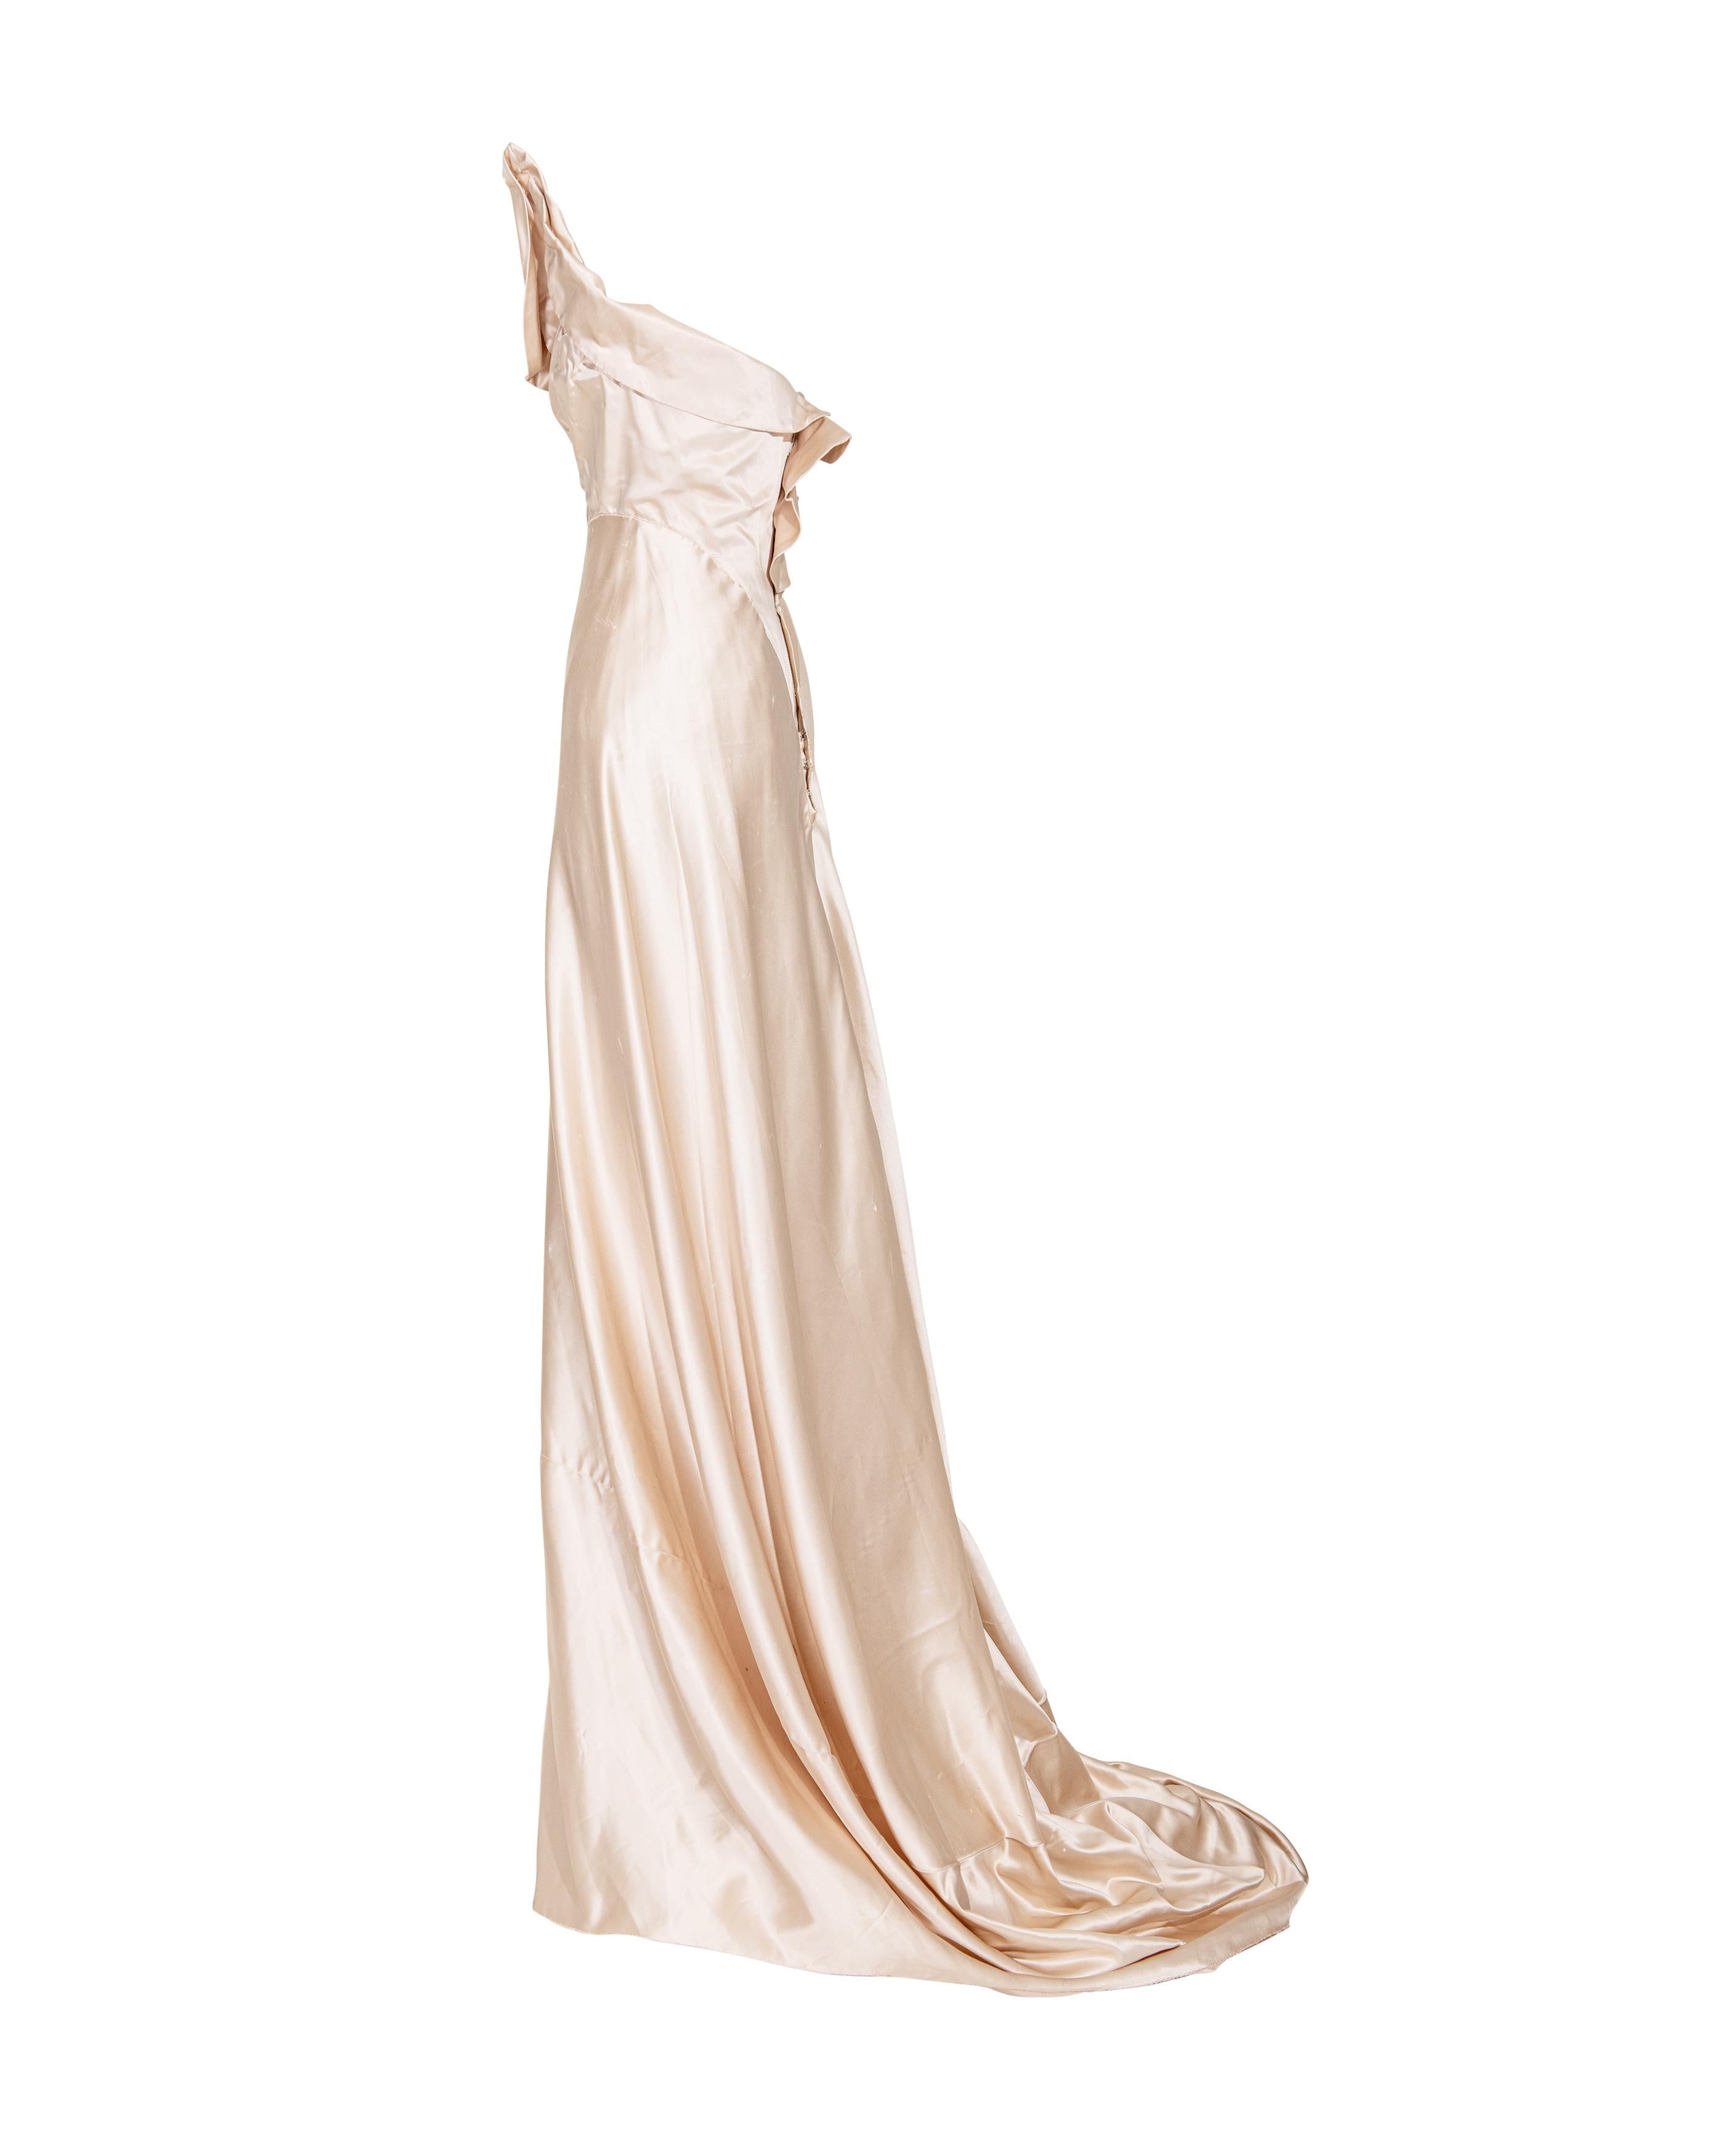 Women's 1940's Irene Lentz Haute Couture Strapless High-Low Cream Silk Gown For Sale